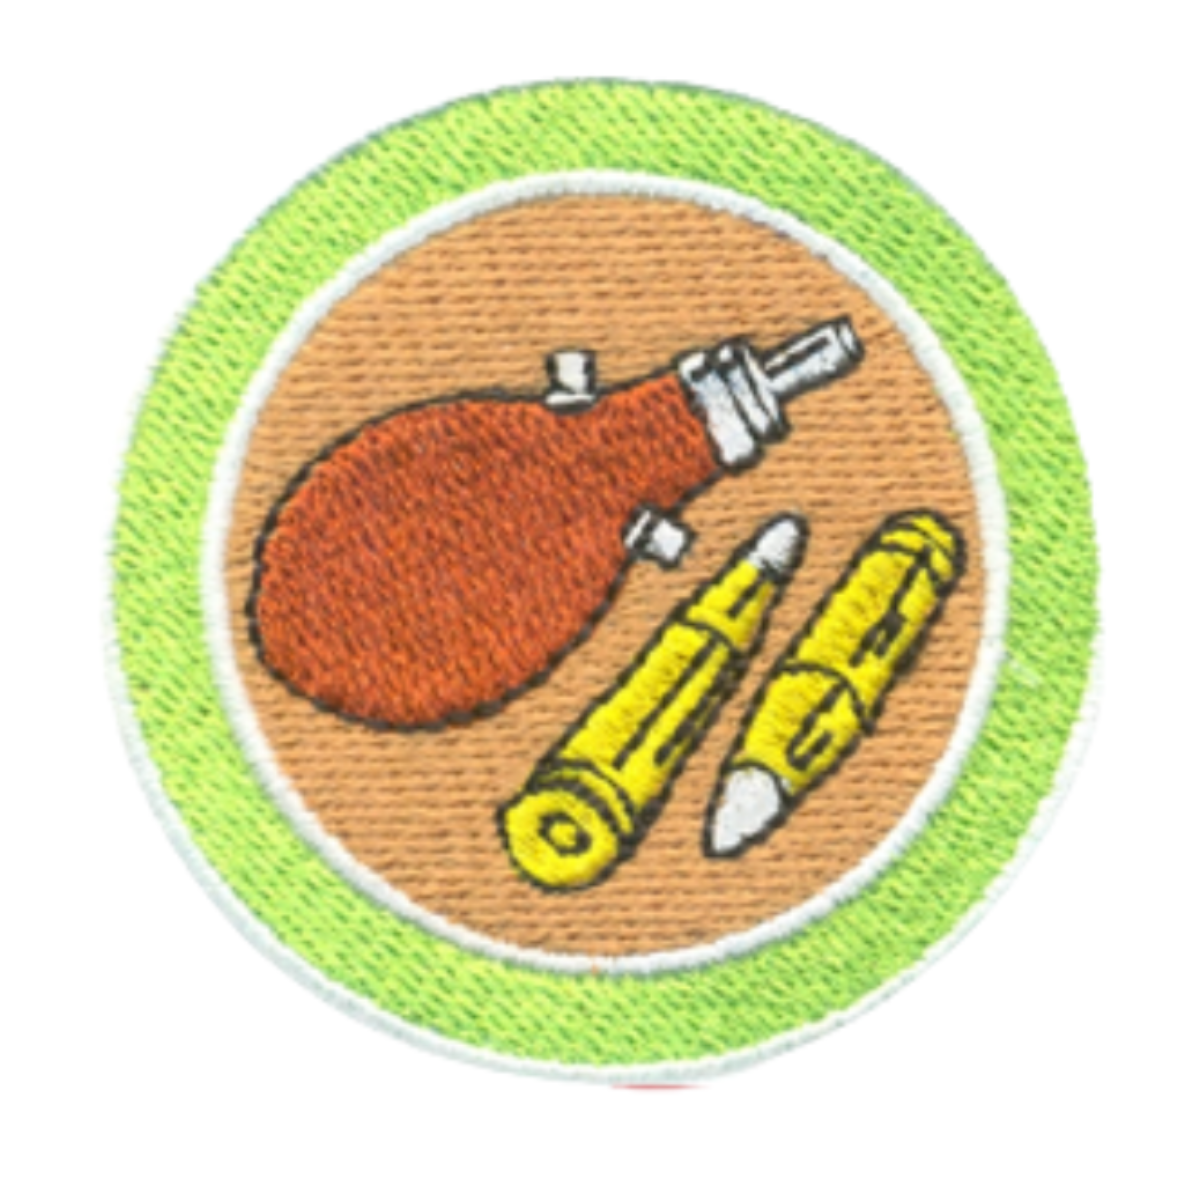 Boy Scouts of America Rifle Shooting 2.25" x 2.25" Patch